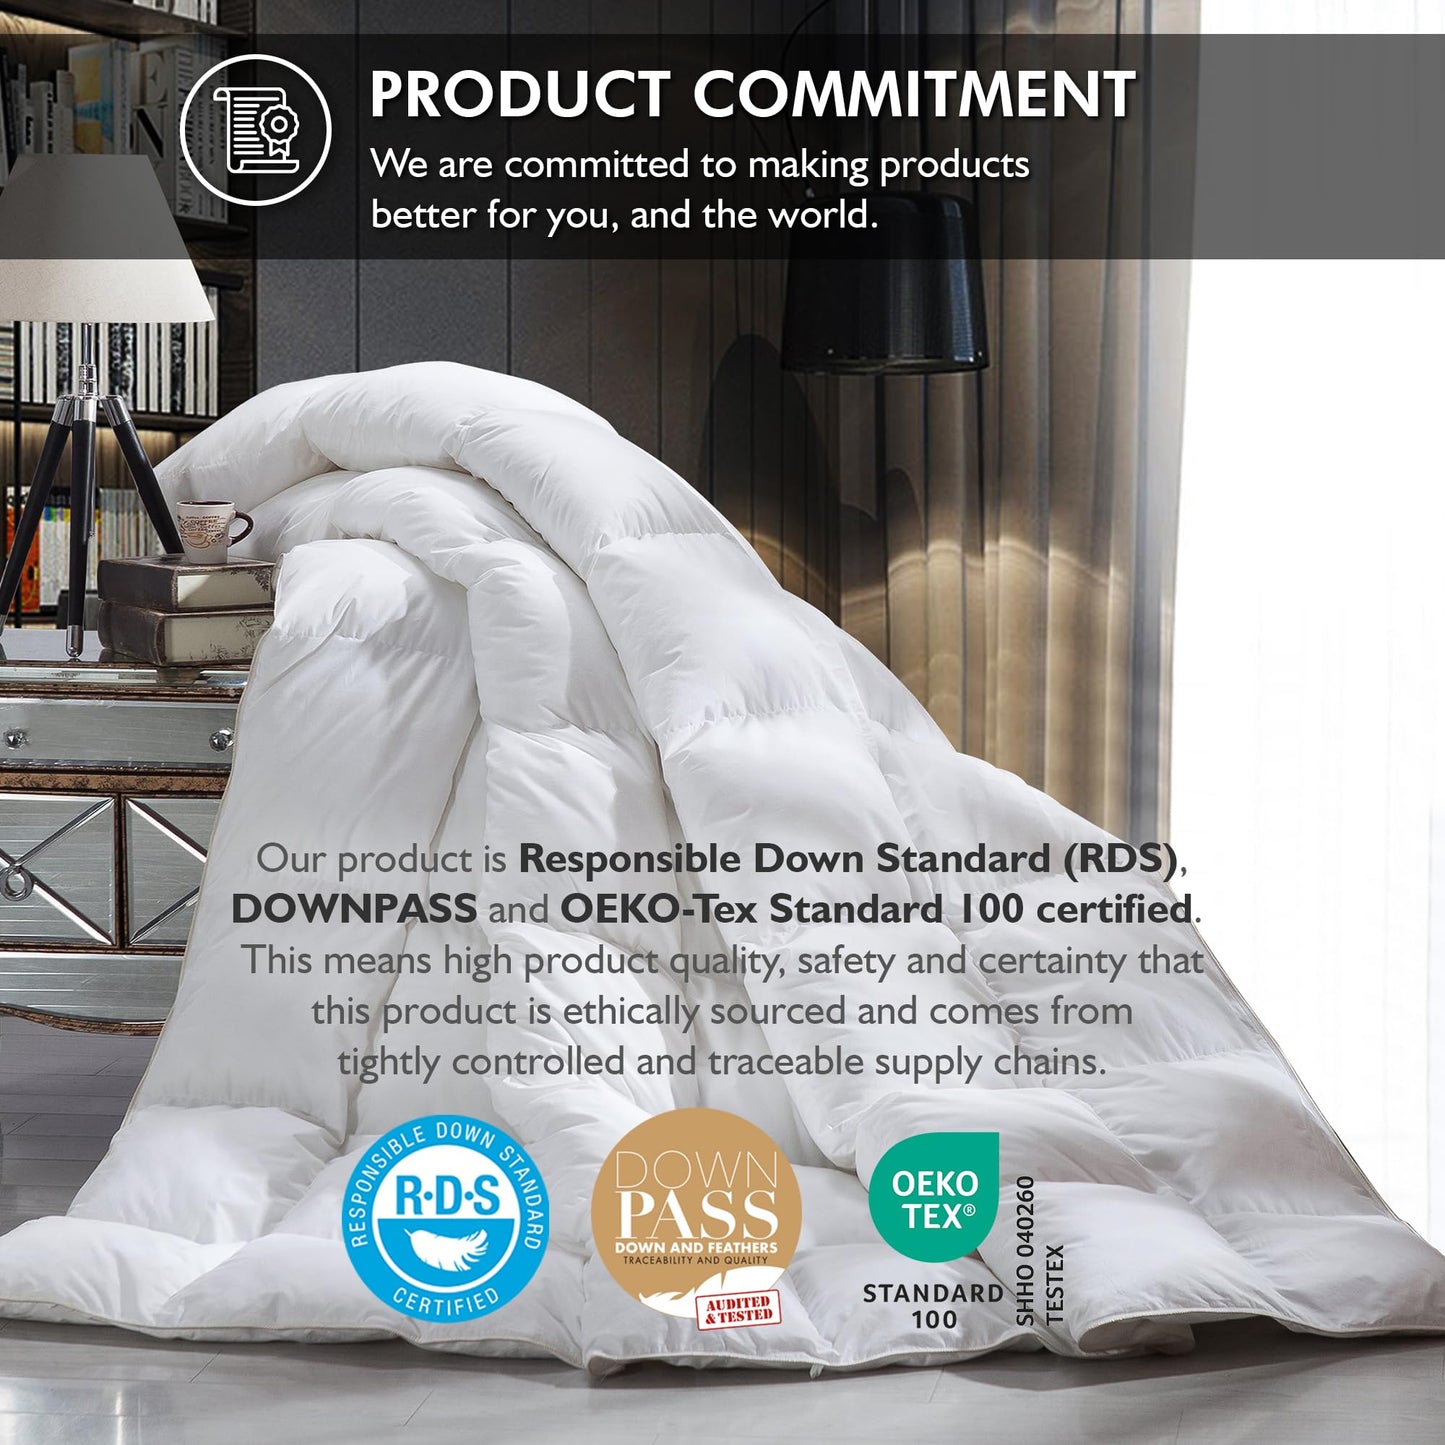 Luxurious Oversize California King 108" x 98" Size Goose Down Fiber Waterfowl Feather Fiber Comforter Duvet, 100% Egyptian Cotton Cover, 68 oz. Fill Weight, Baffle Box Design, White Solid